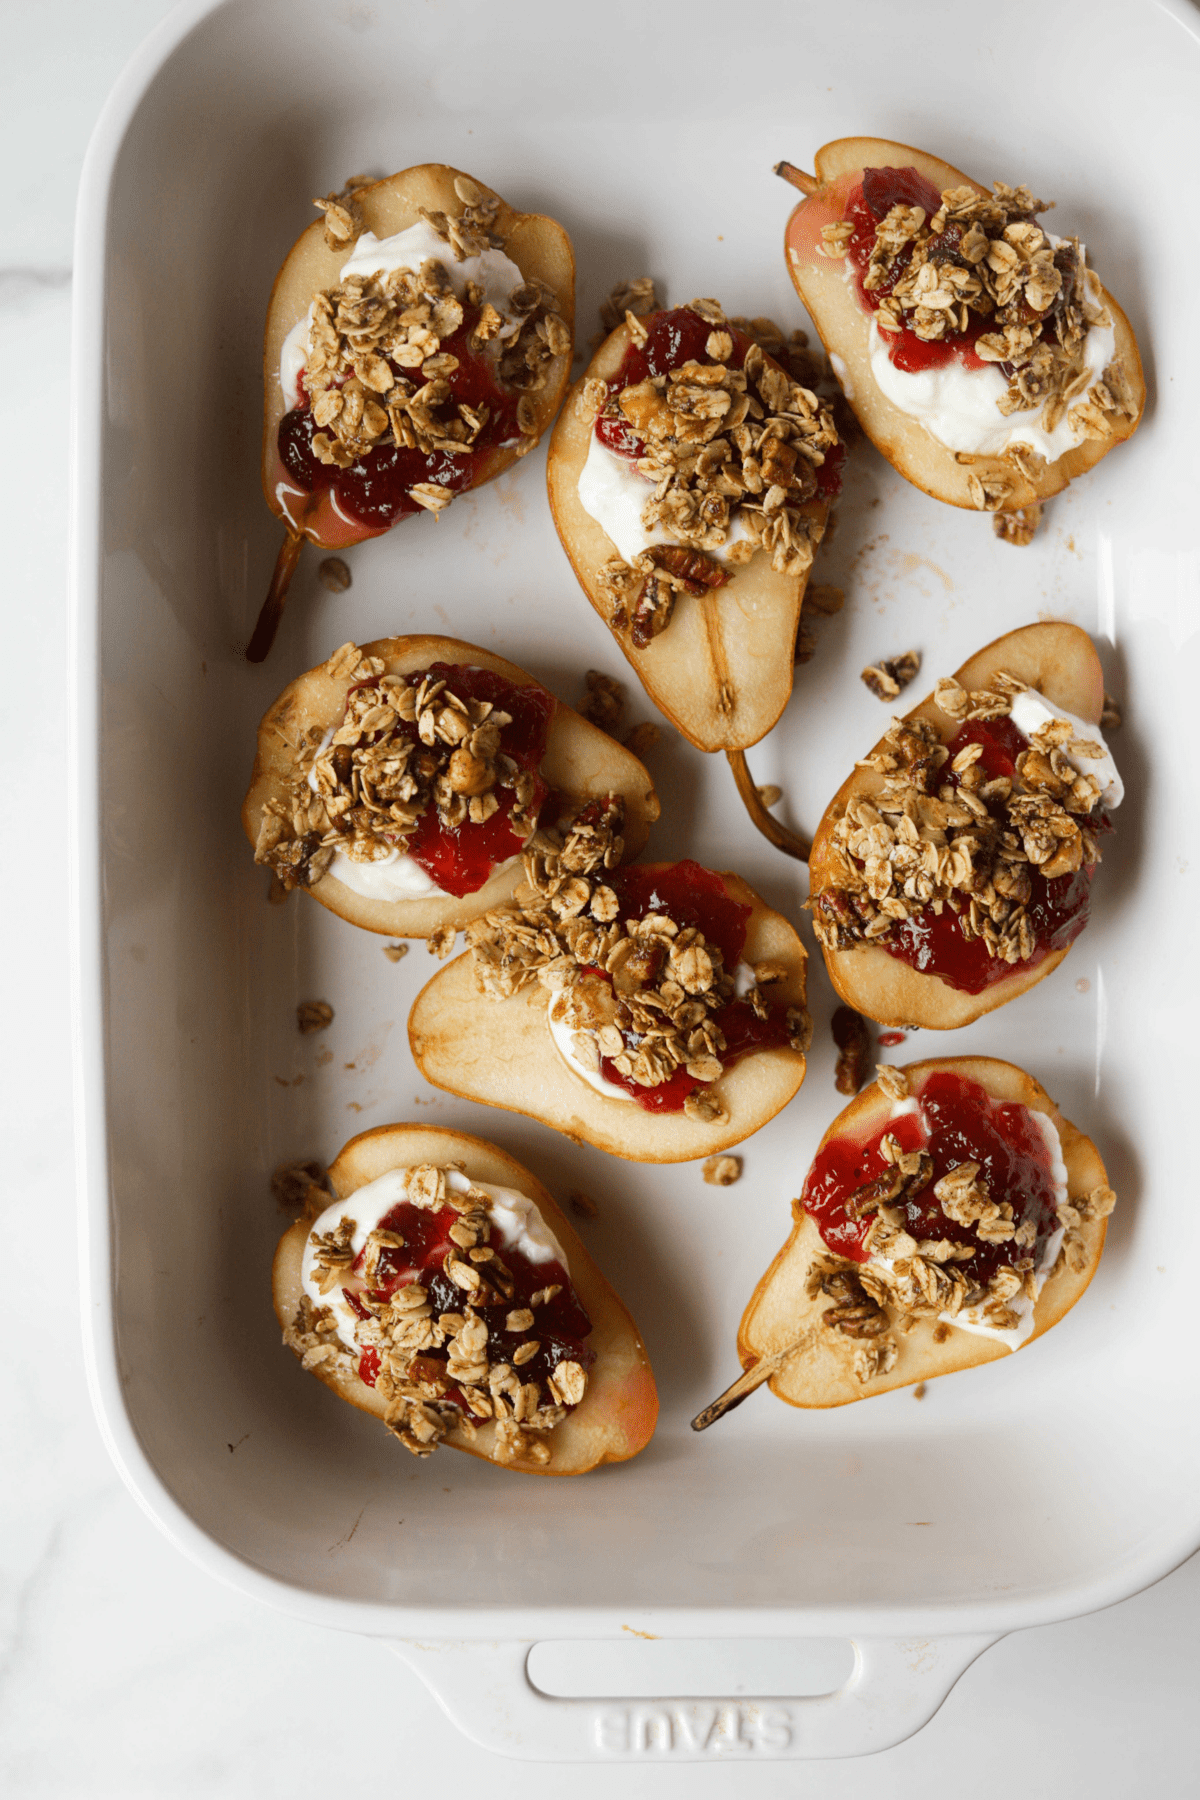 A birds eye view of a baking dish with cranberry and goat cheese stuffed pears.